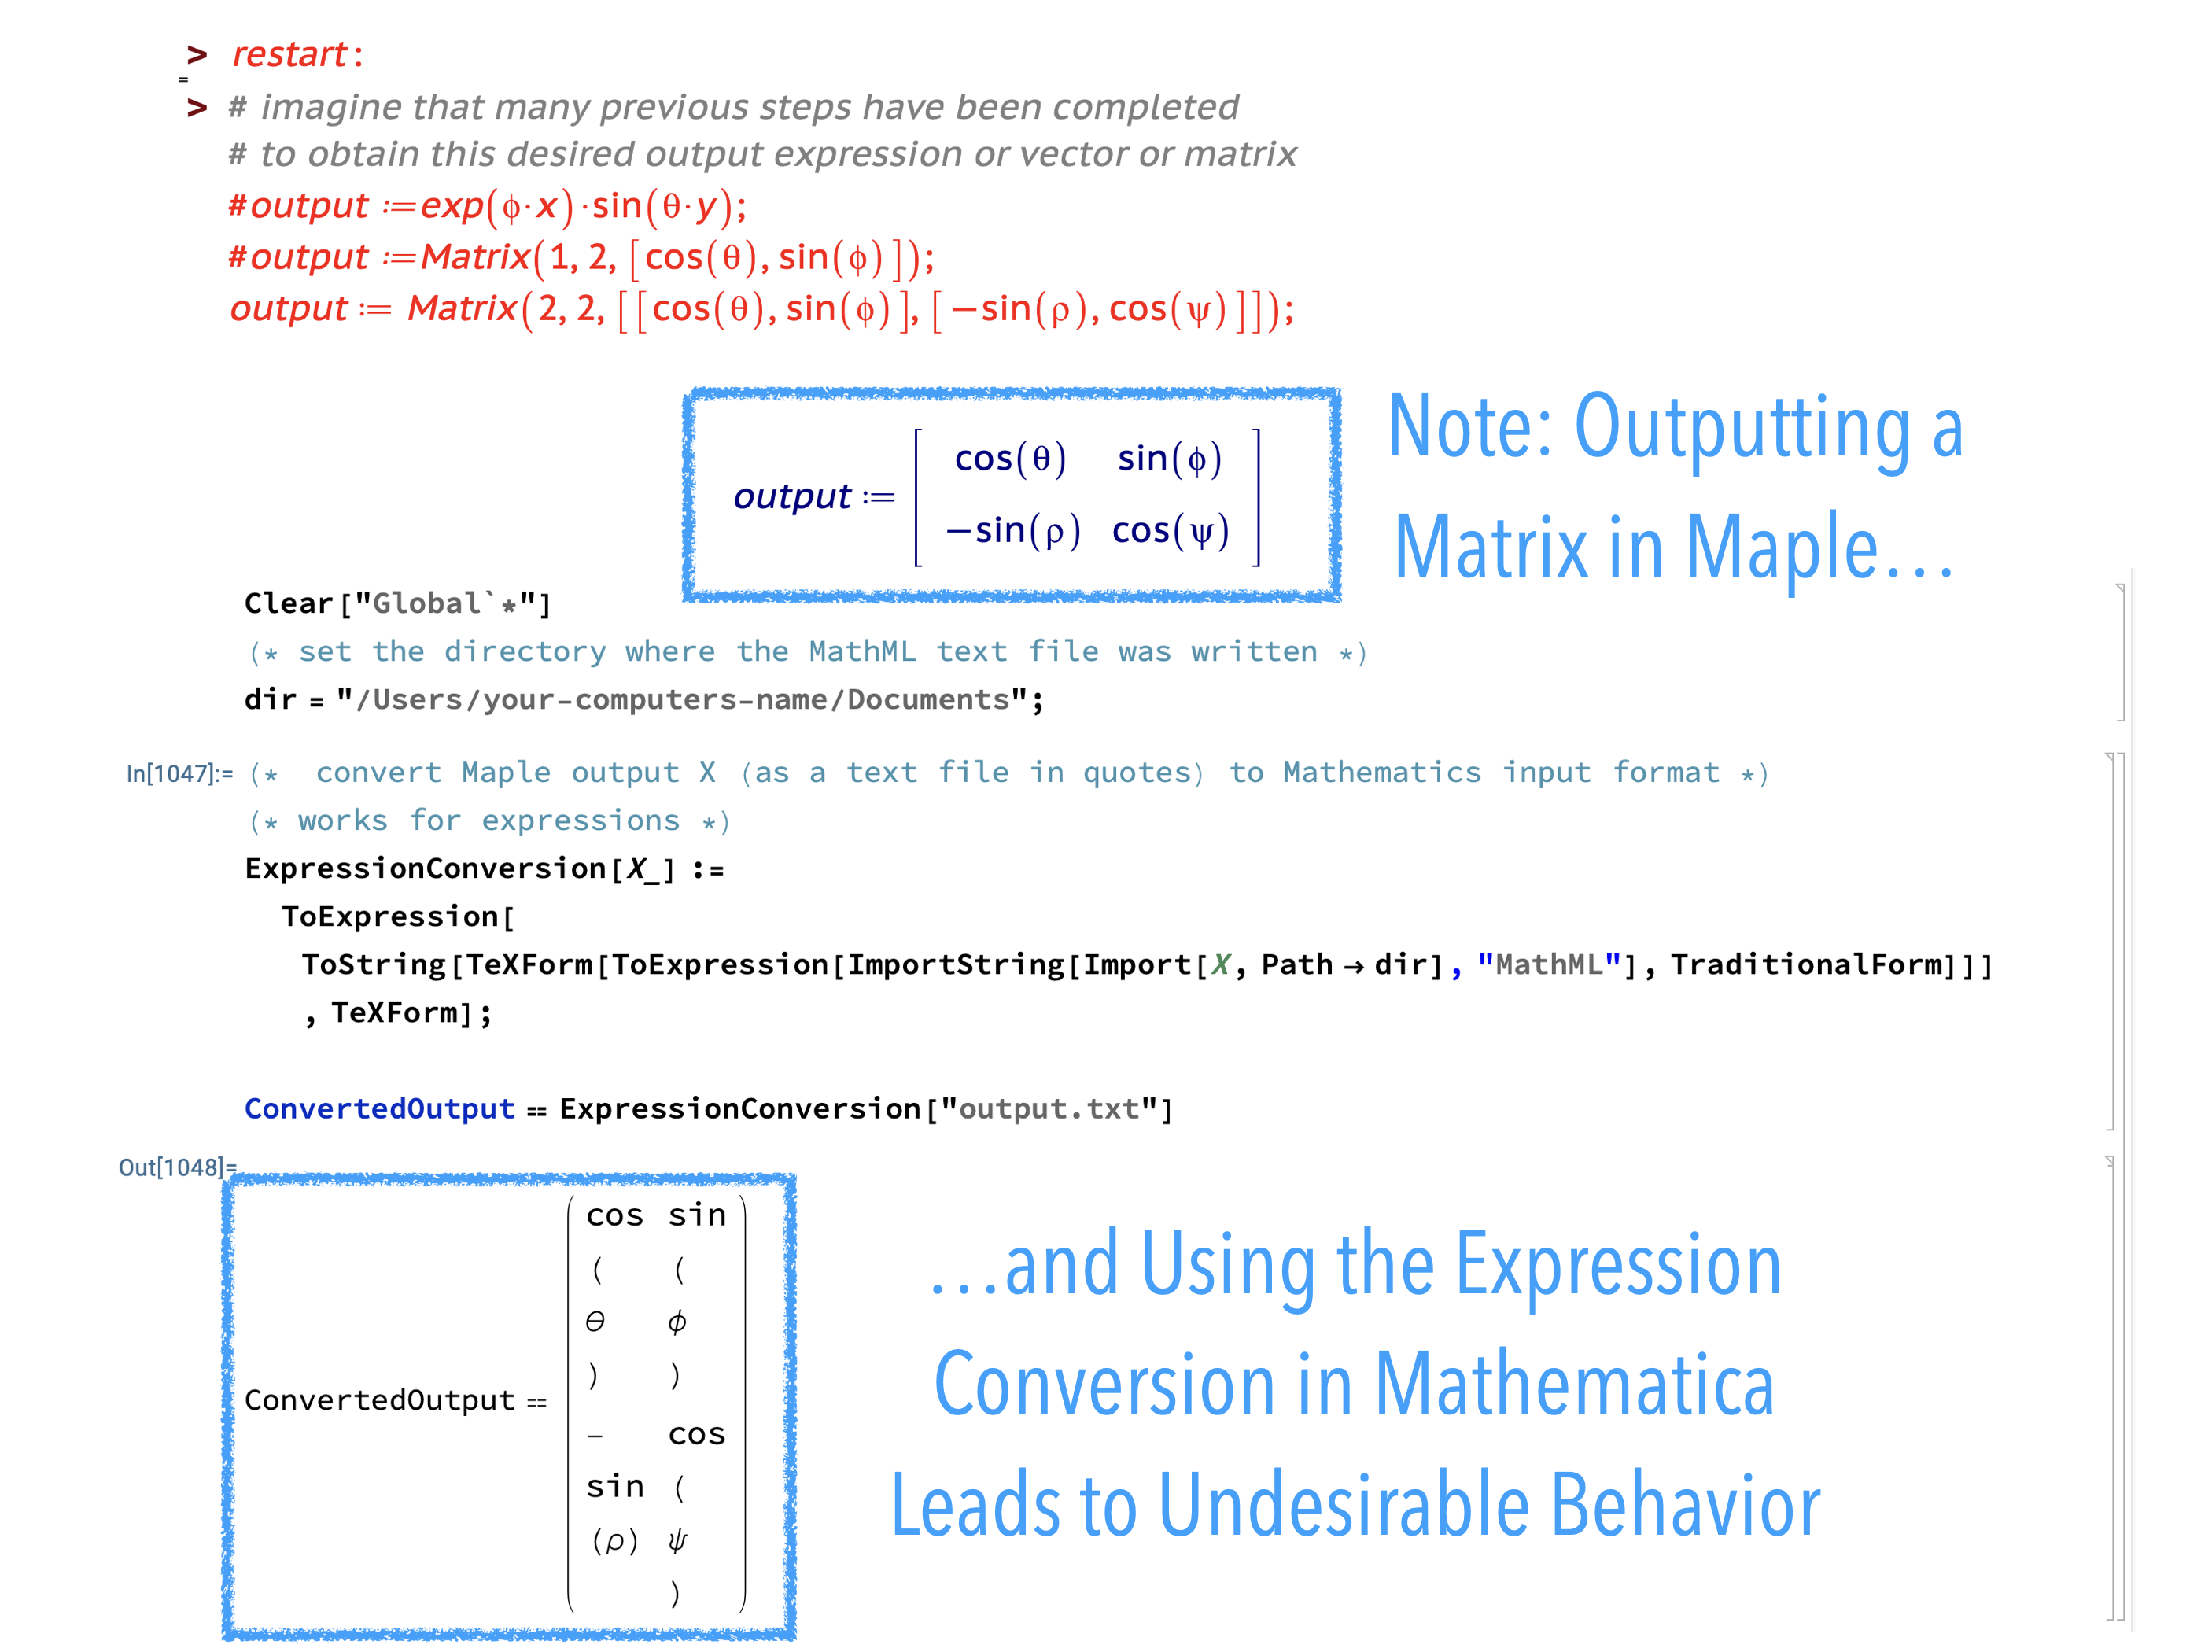 If the Maple Output is a Matrix and the Expression Conversion is Used in Mathematica, Then an Undesirable Conversion Will Occur.